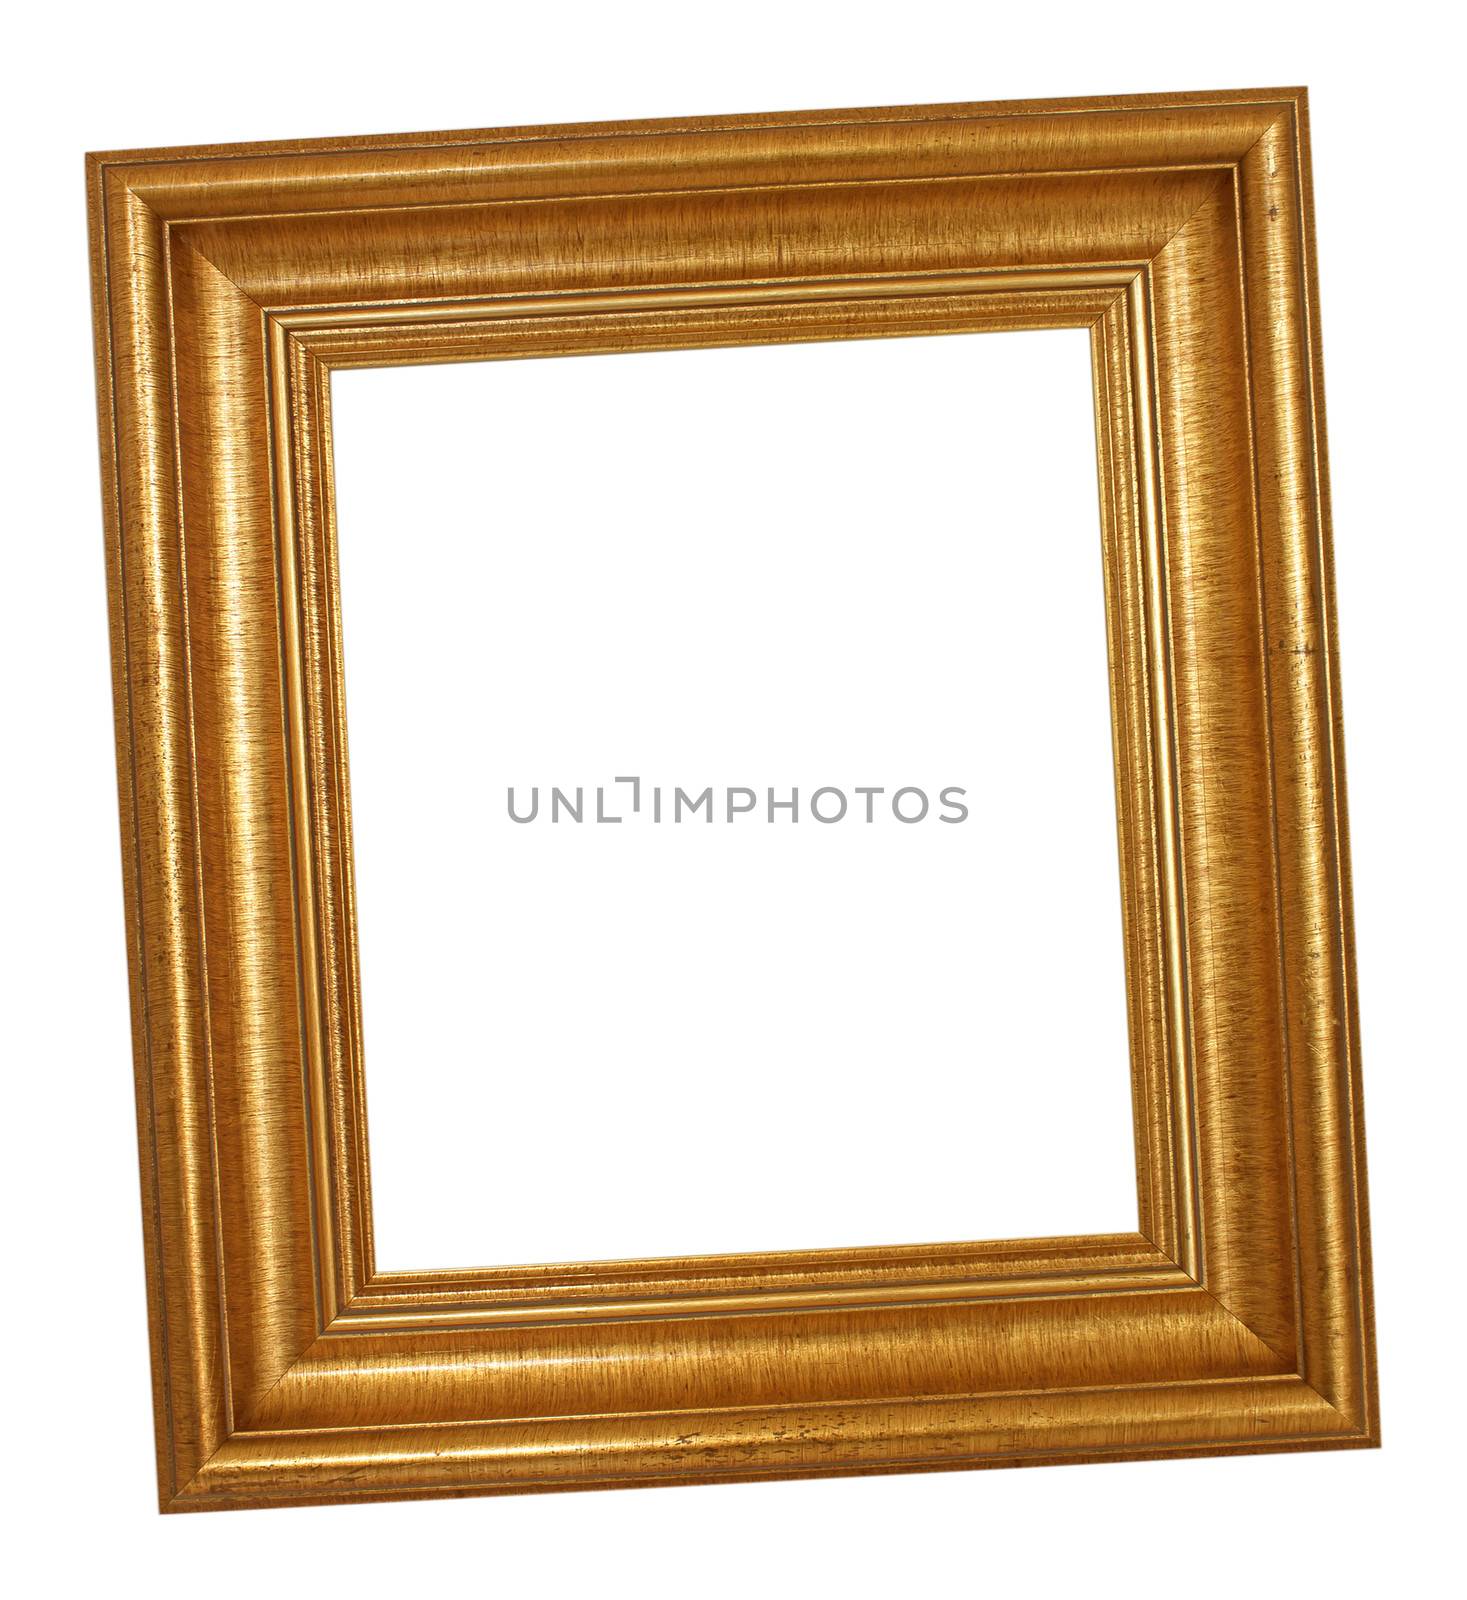 Gold antique frame isolated on white background.